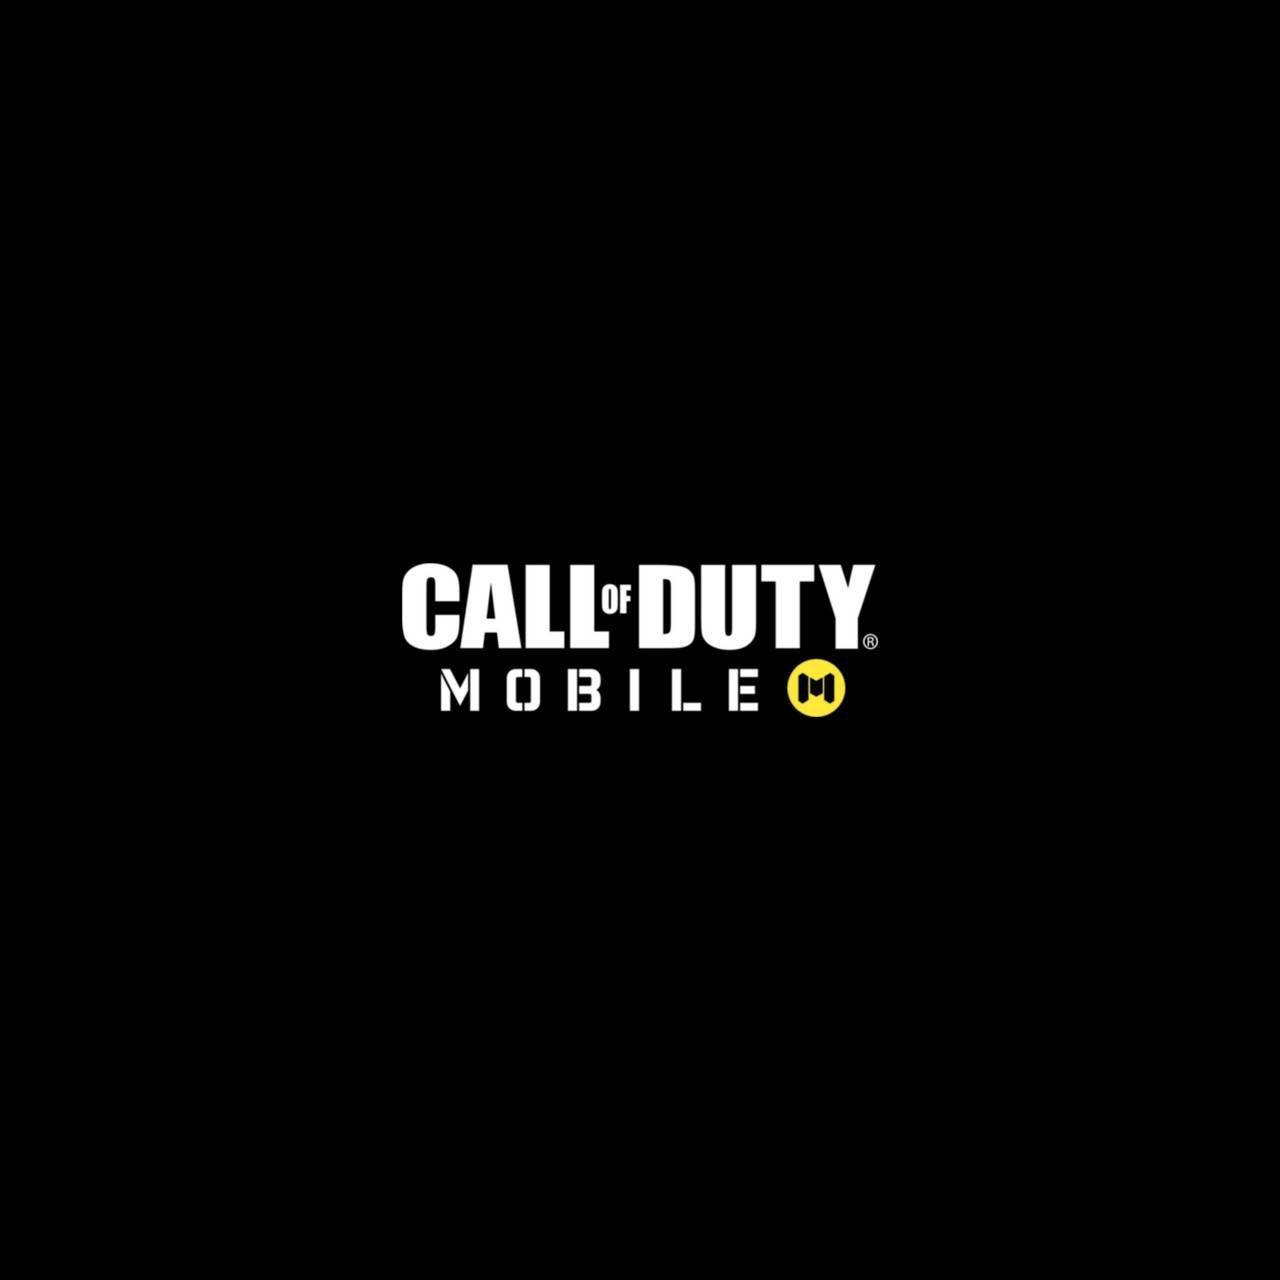 Call Of Duty Mobile Logo Black Background Portrait Background